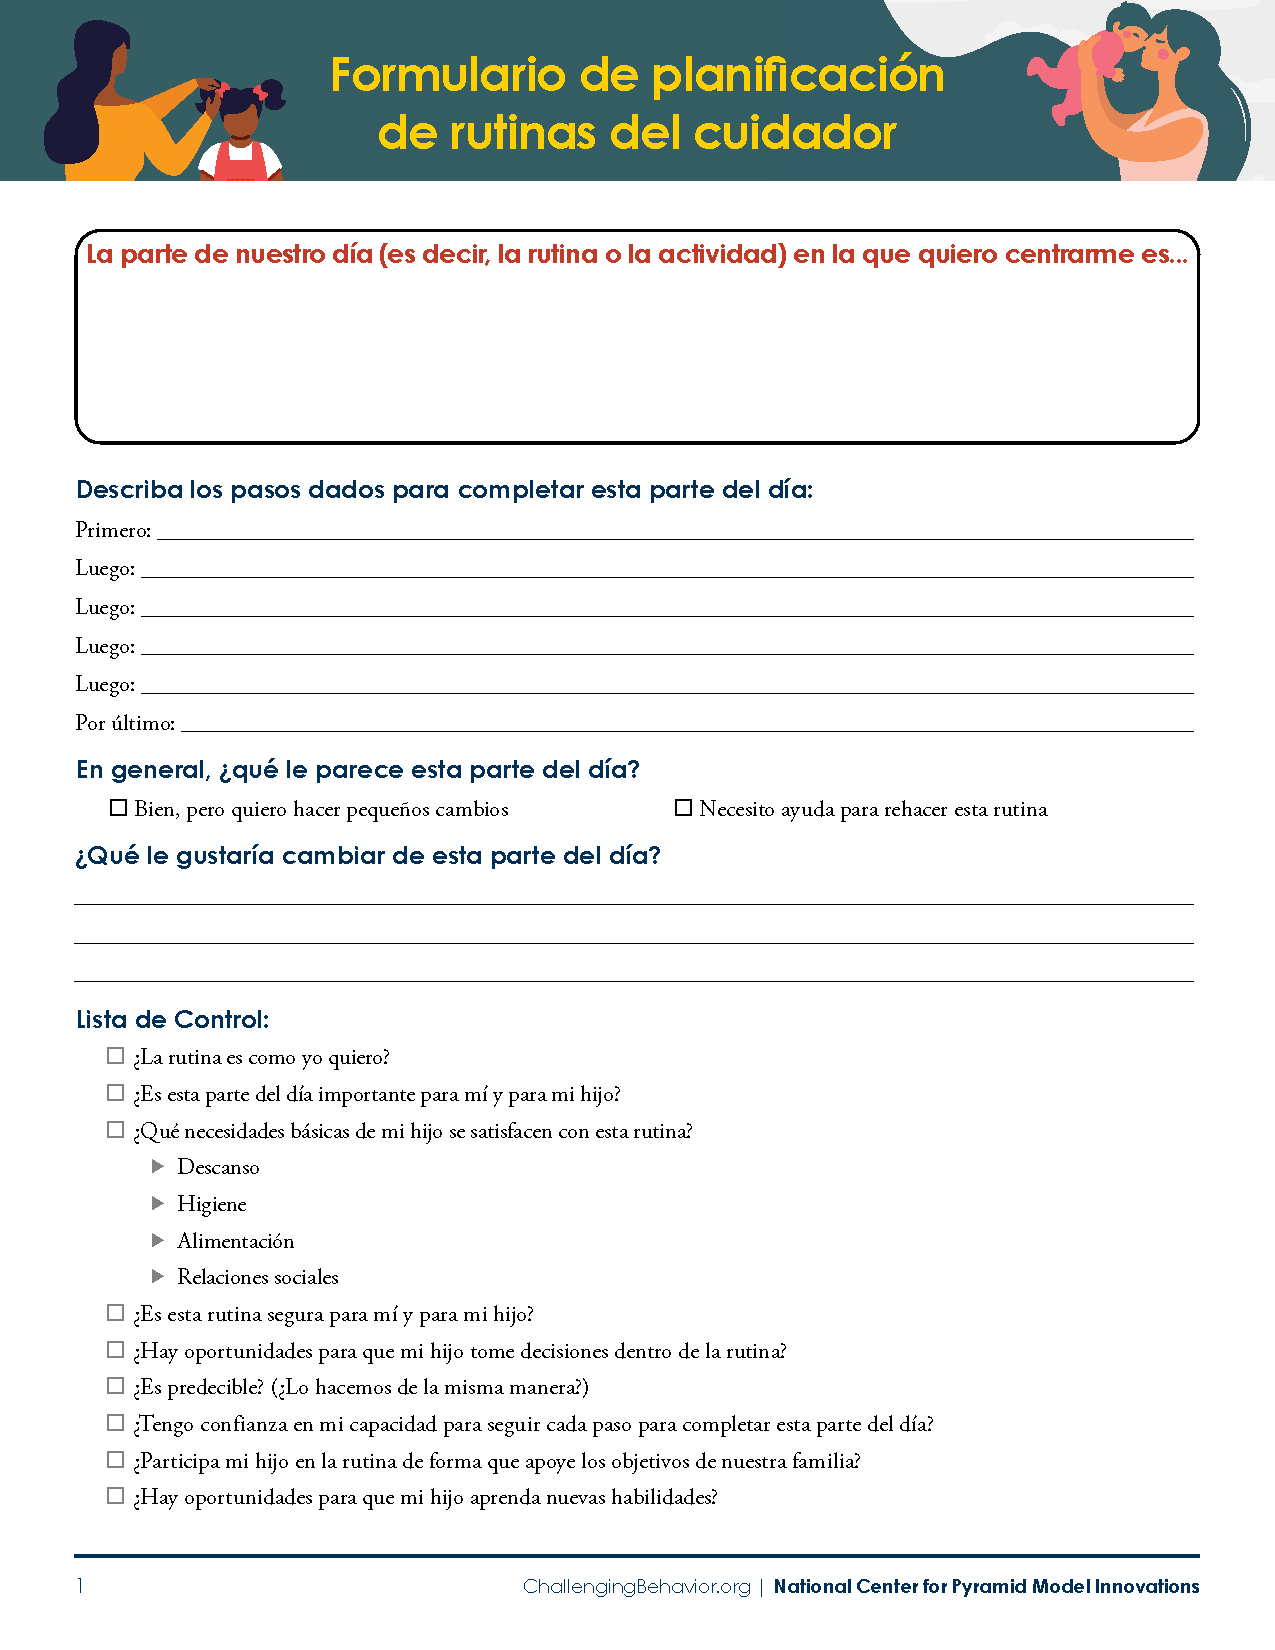 Caregiver Responsive Routines Planning Form (Spanish)